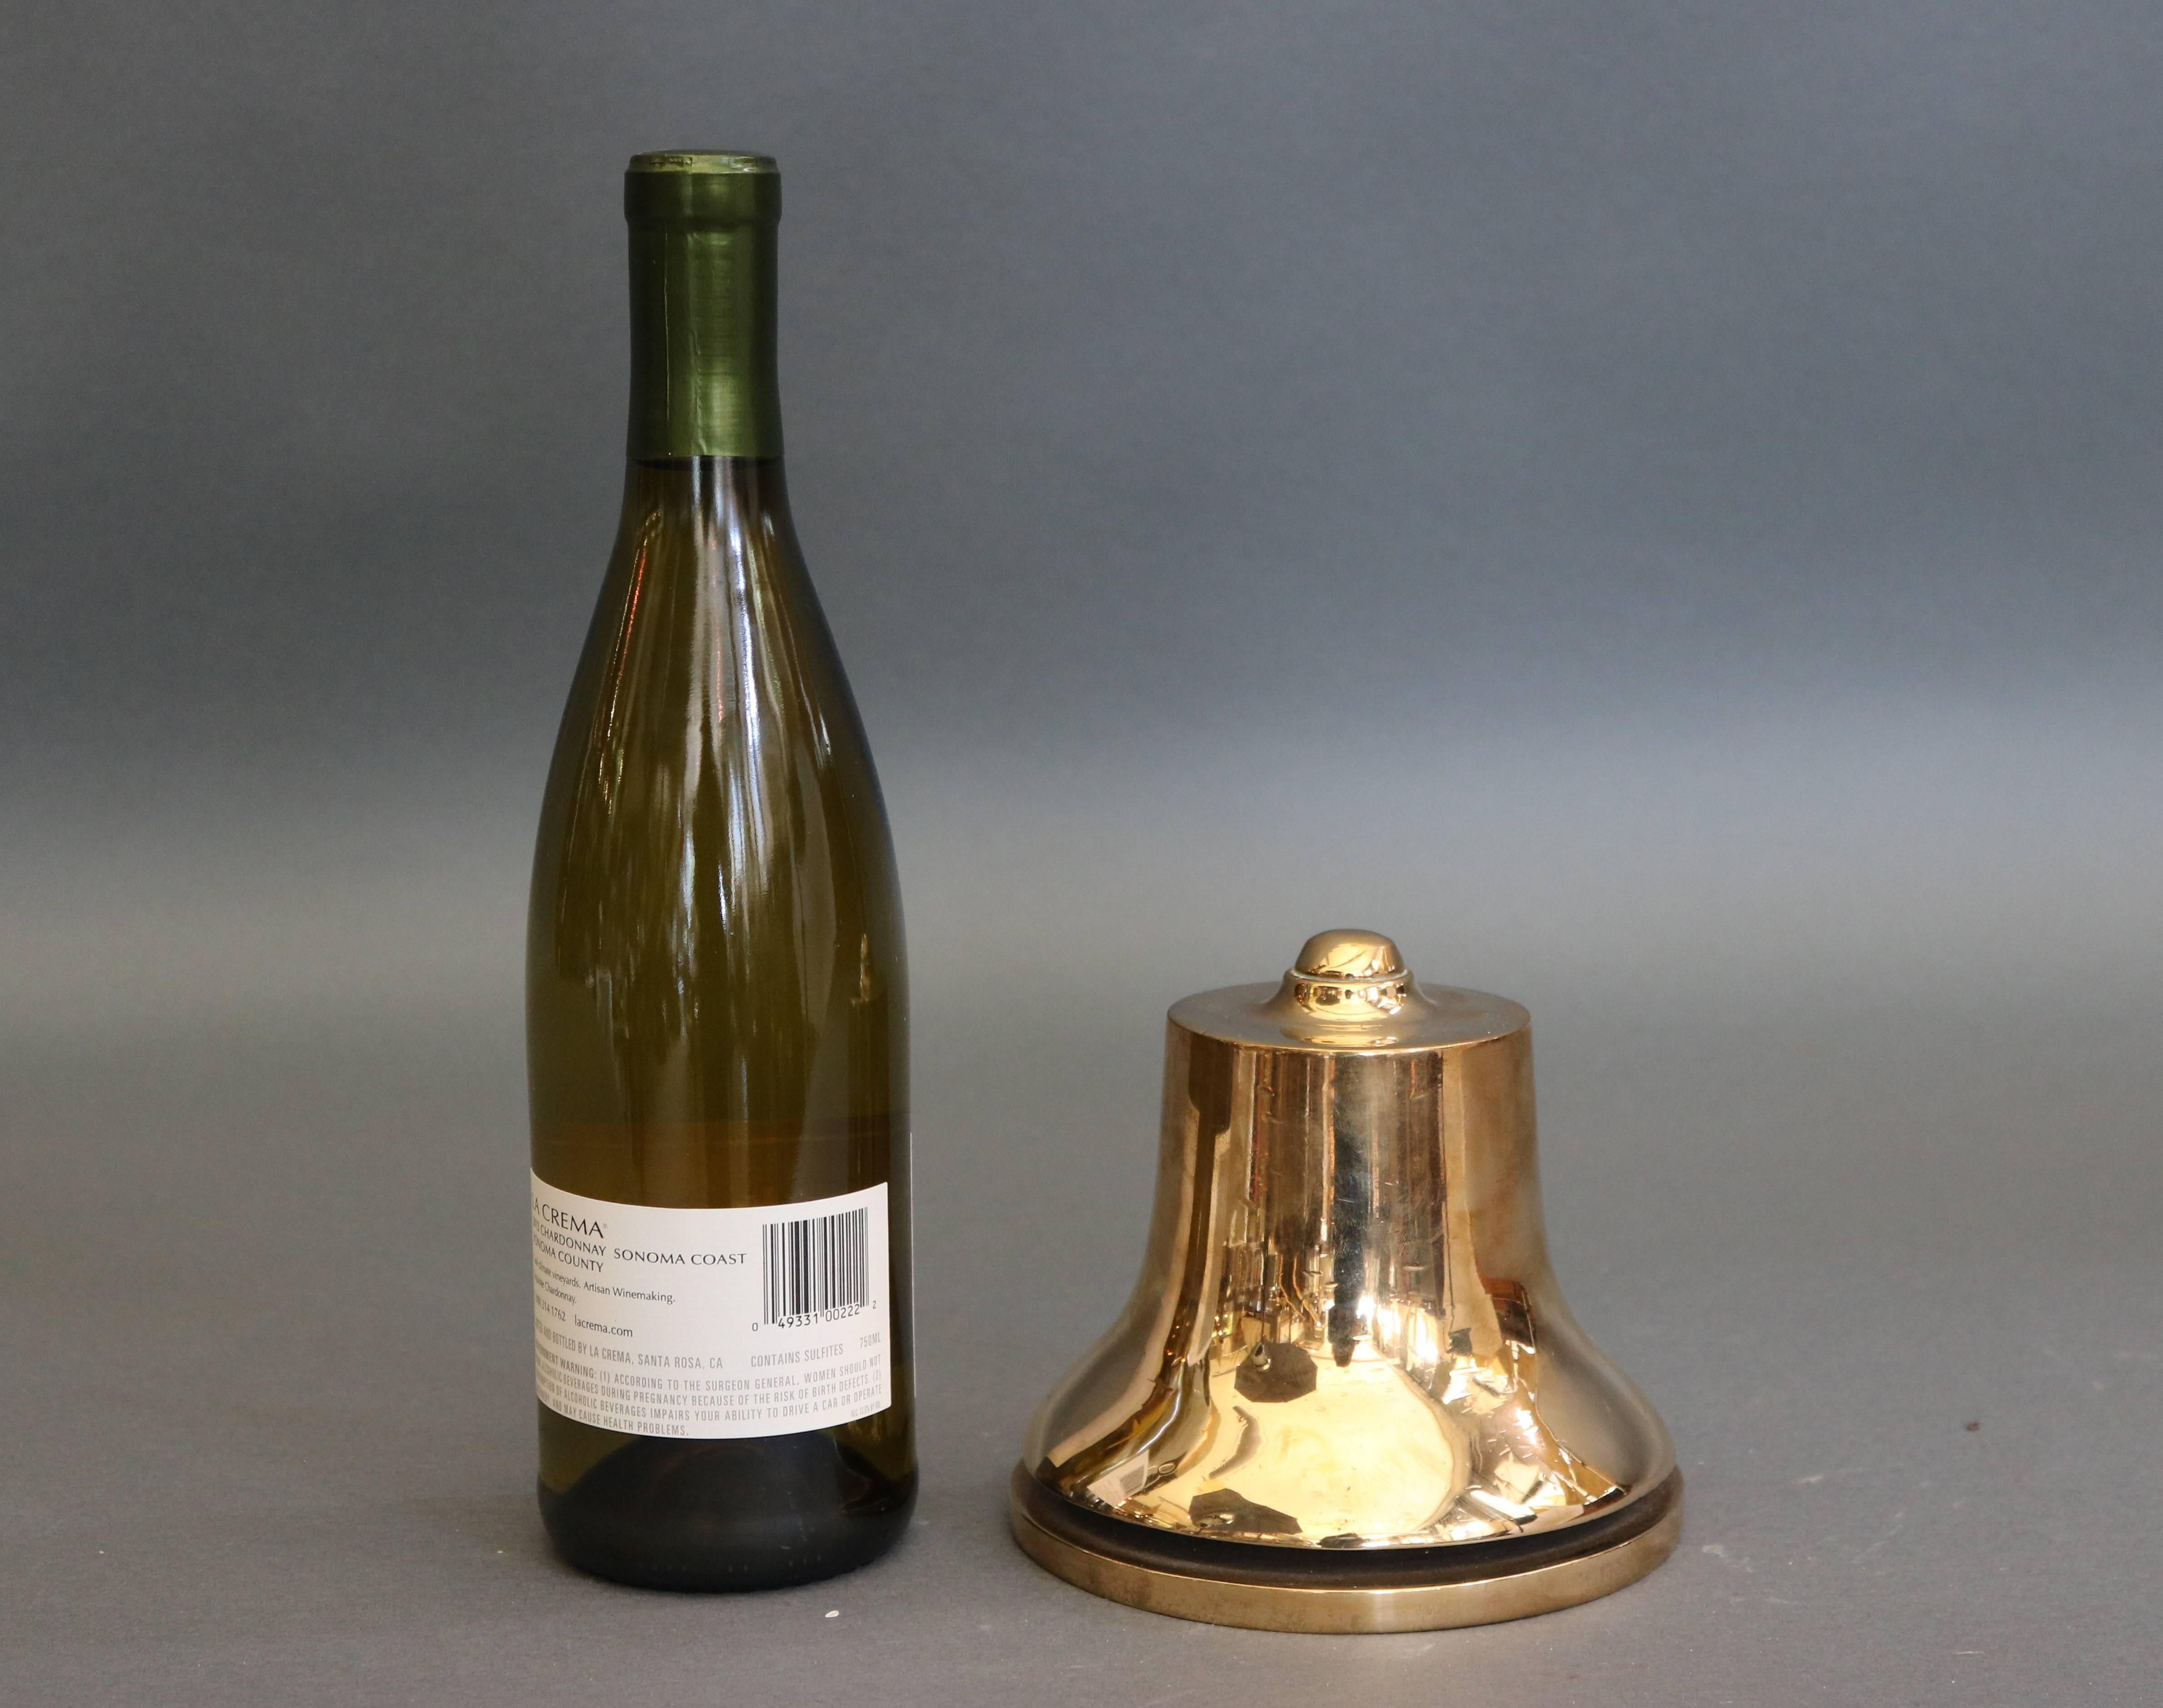 Heavy brass bell by the Green Company of ten walnut St, Kansas city, MO. 

Overall dimensions: 5.5" H x 6" W.